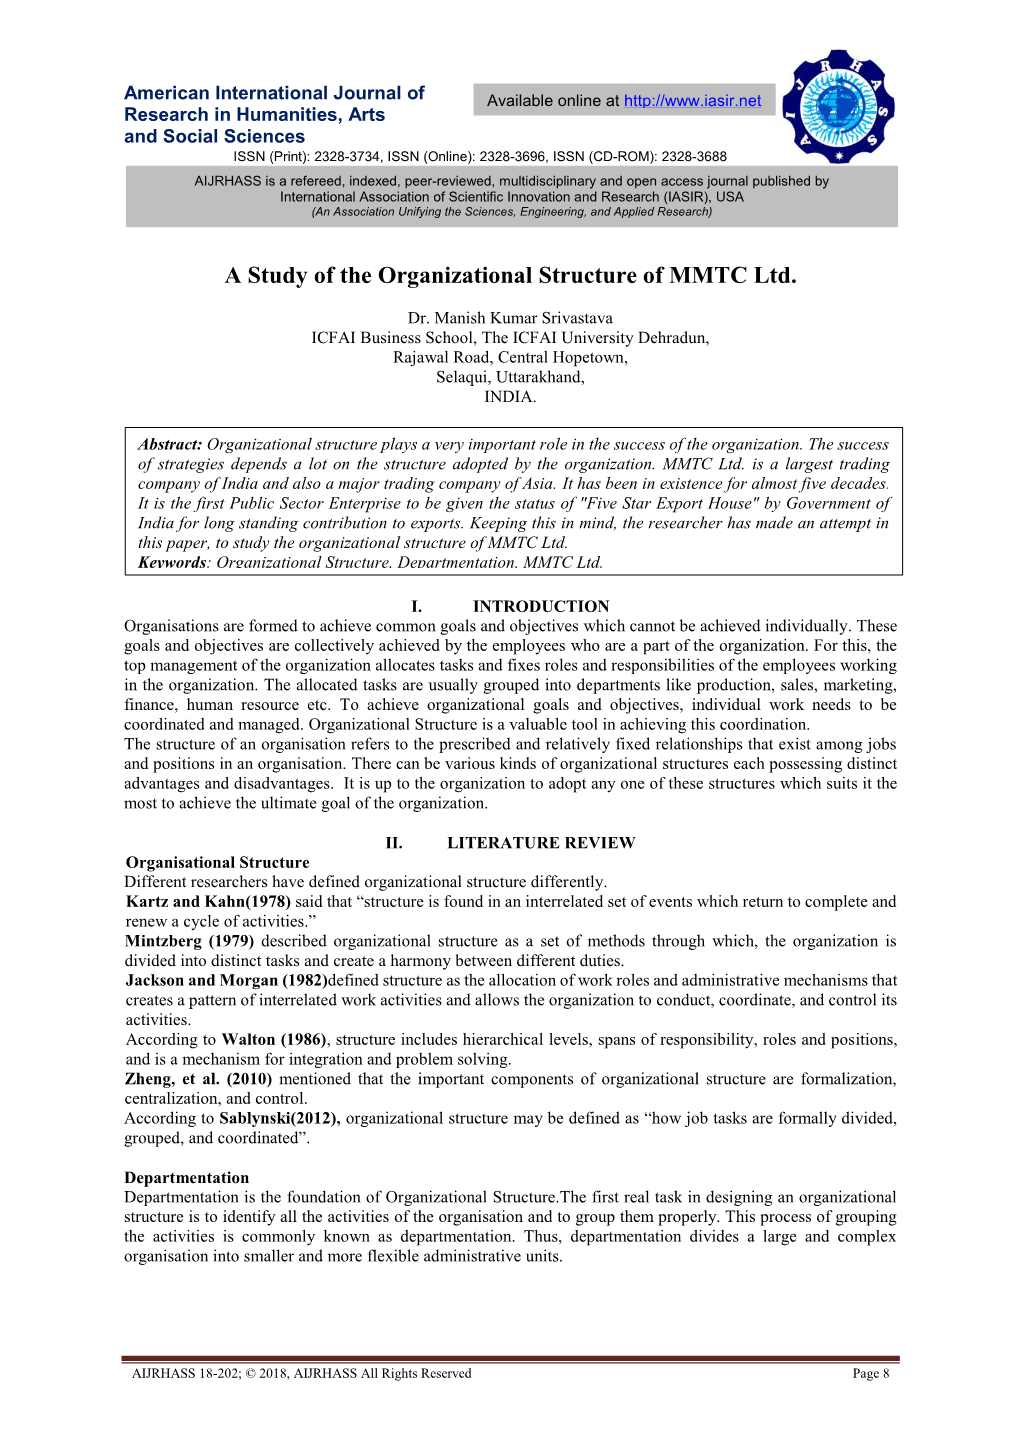 A Study of the Organizational Structure of MMTC Ltd